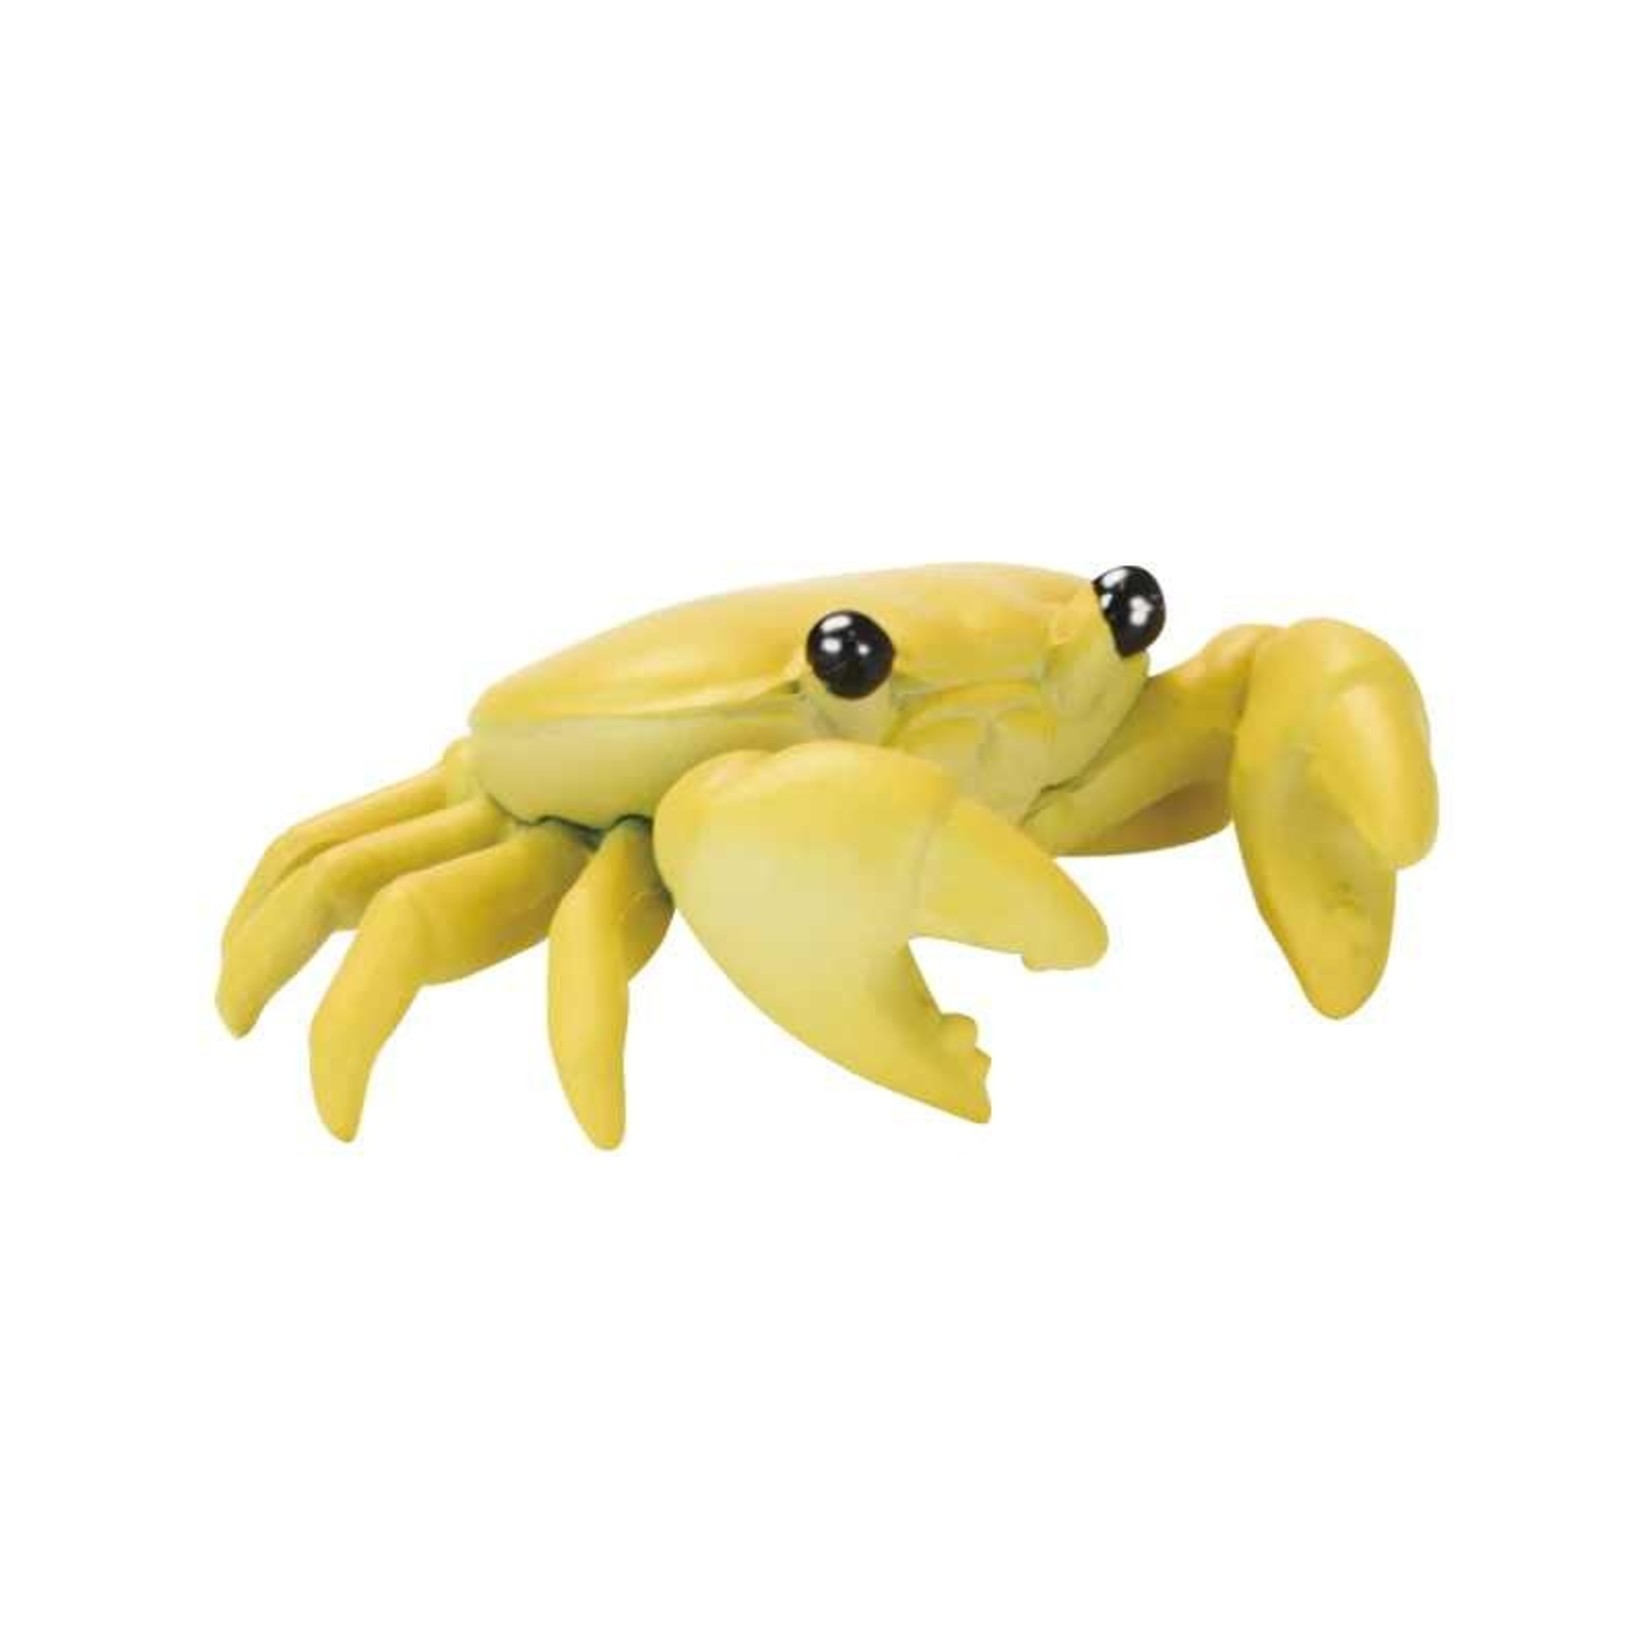 YELL Crab Cable Holder in Capsule - 70937